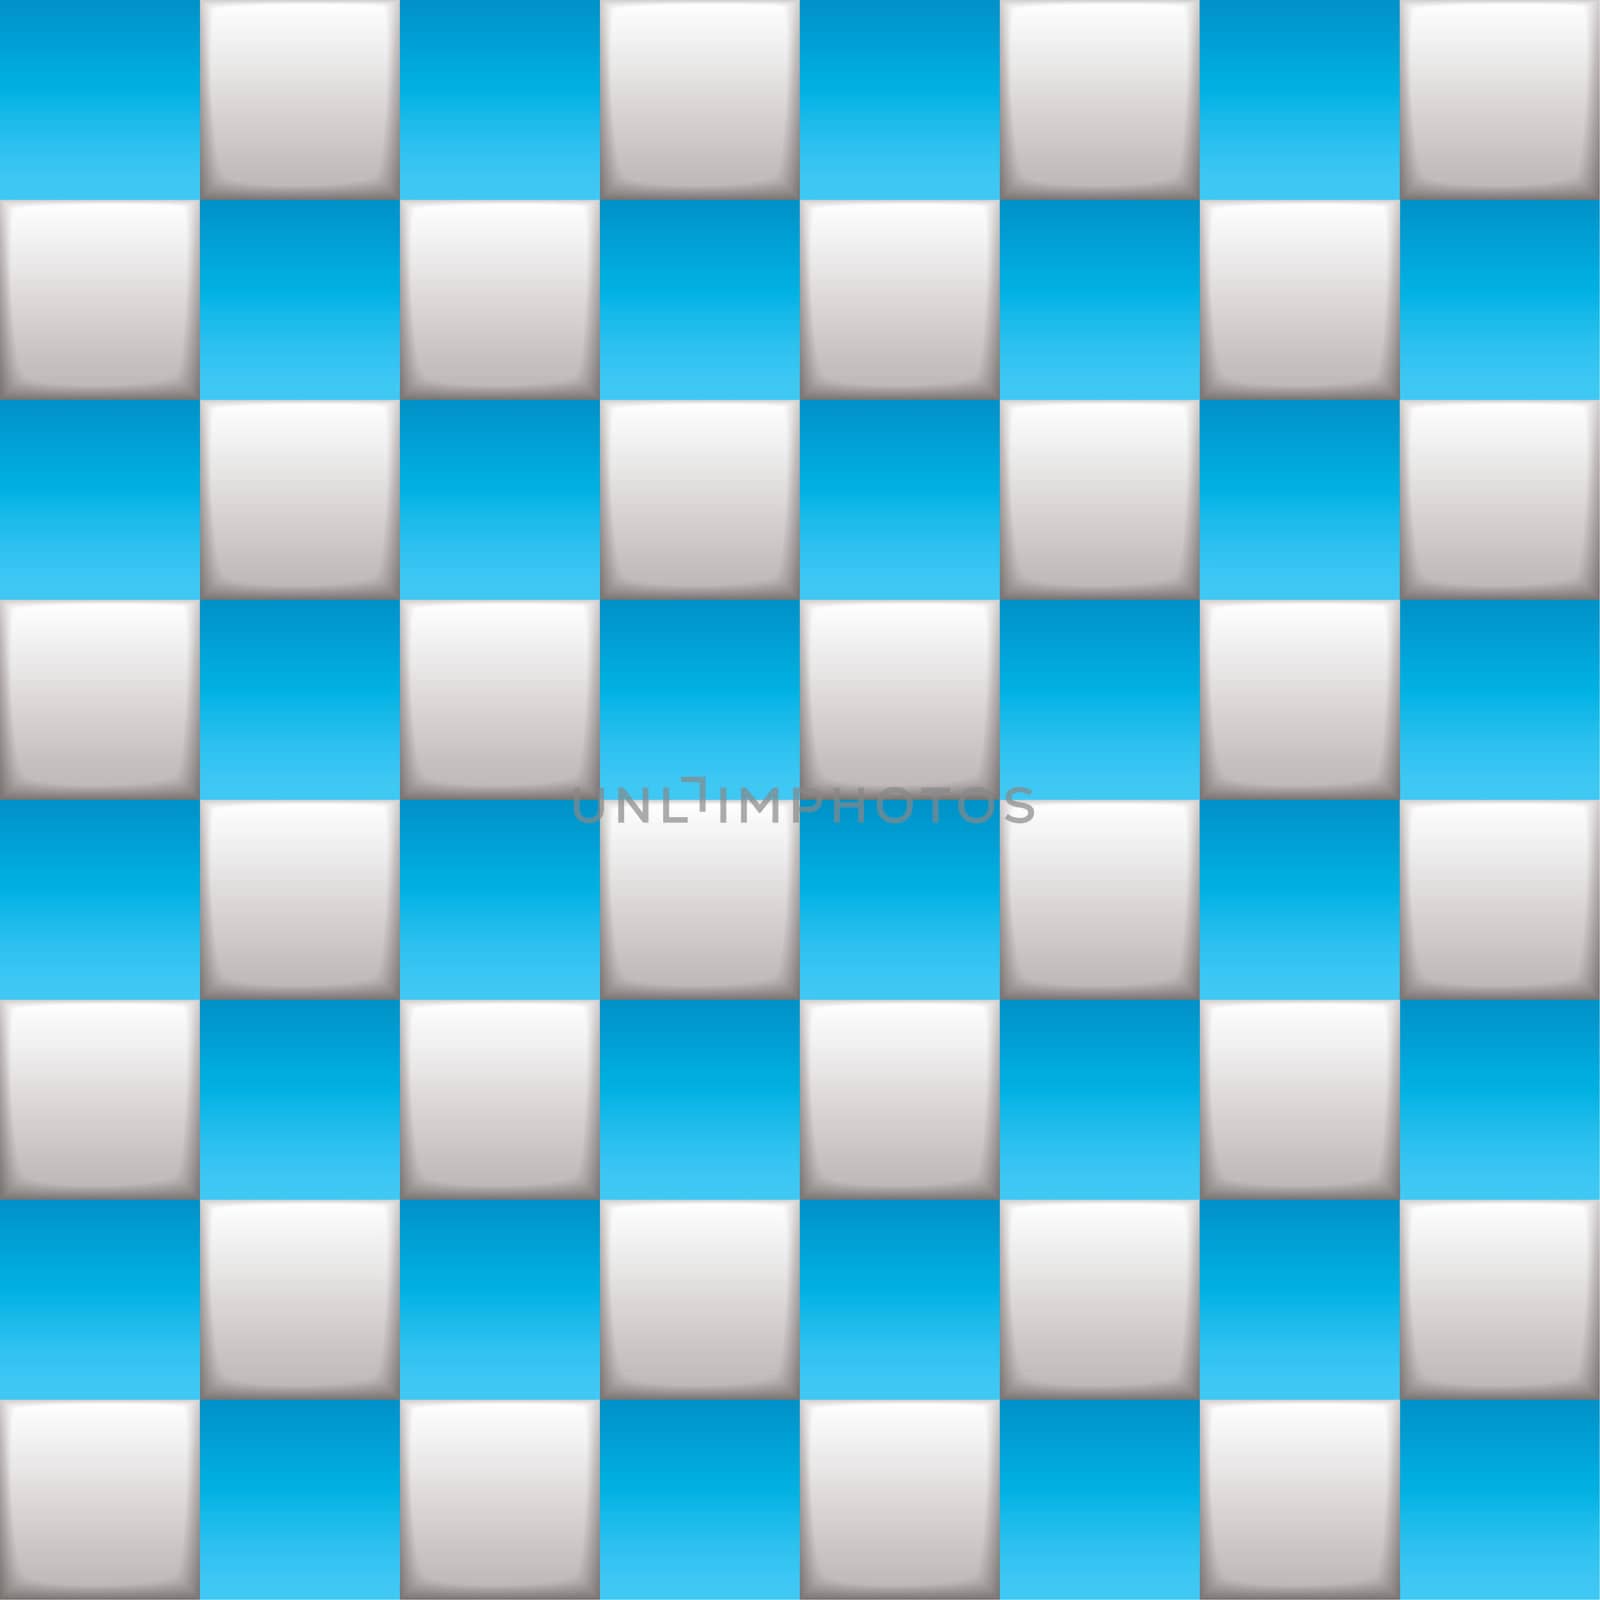 Blue and white squares on a seamless checkered background